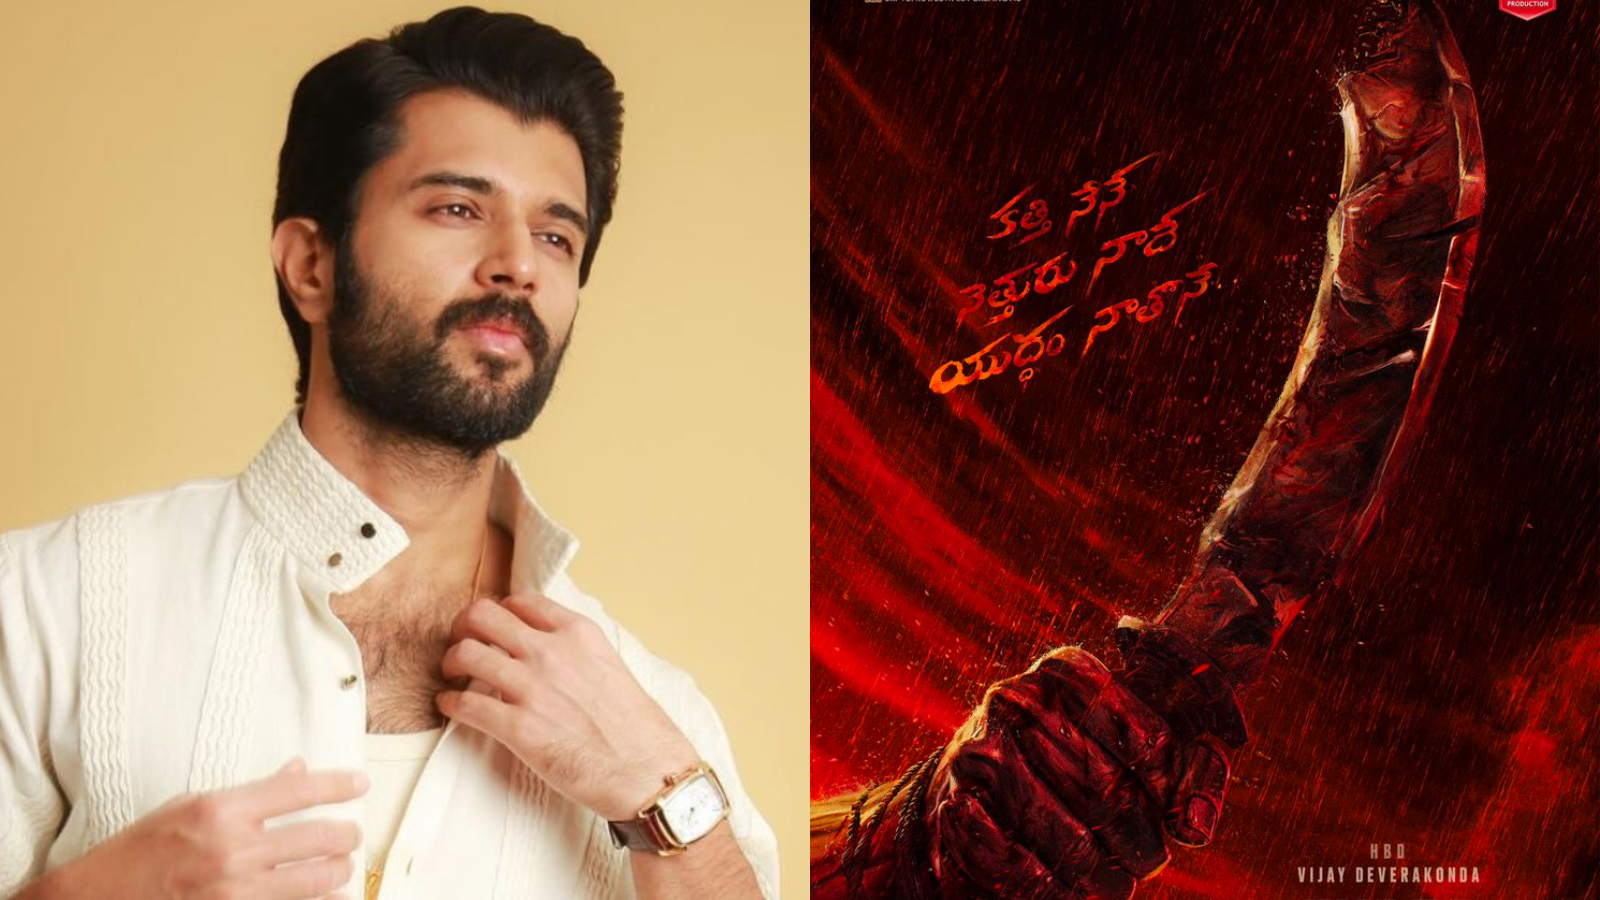 android, vijay deverakonda’s birthday gift to fans: actor to star in dil raju’s pan-india rural actioner svc 59, see blood-soaked poster